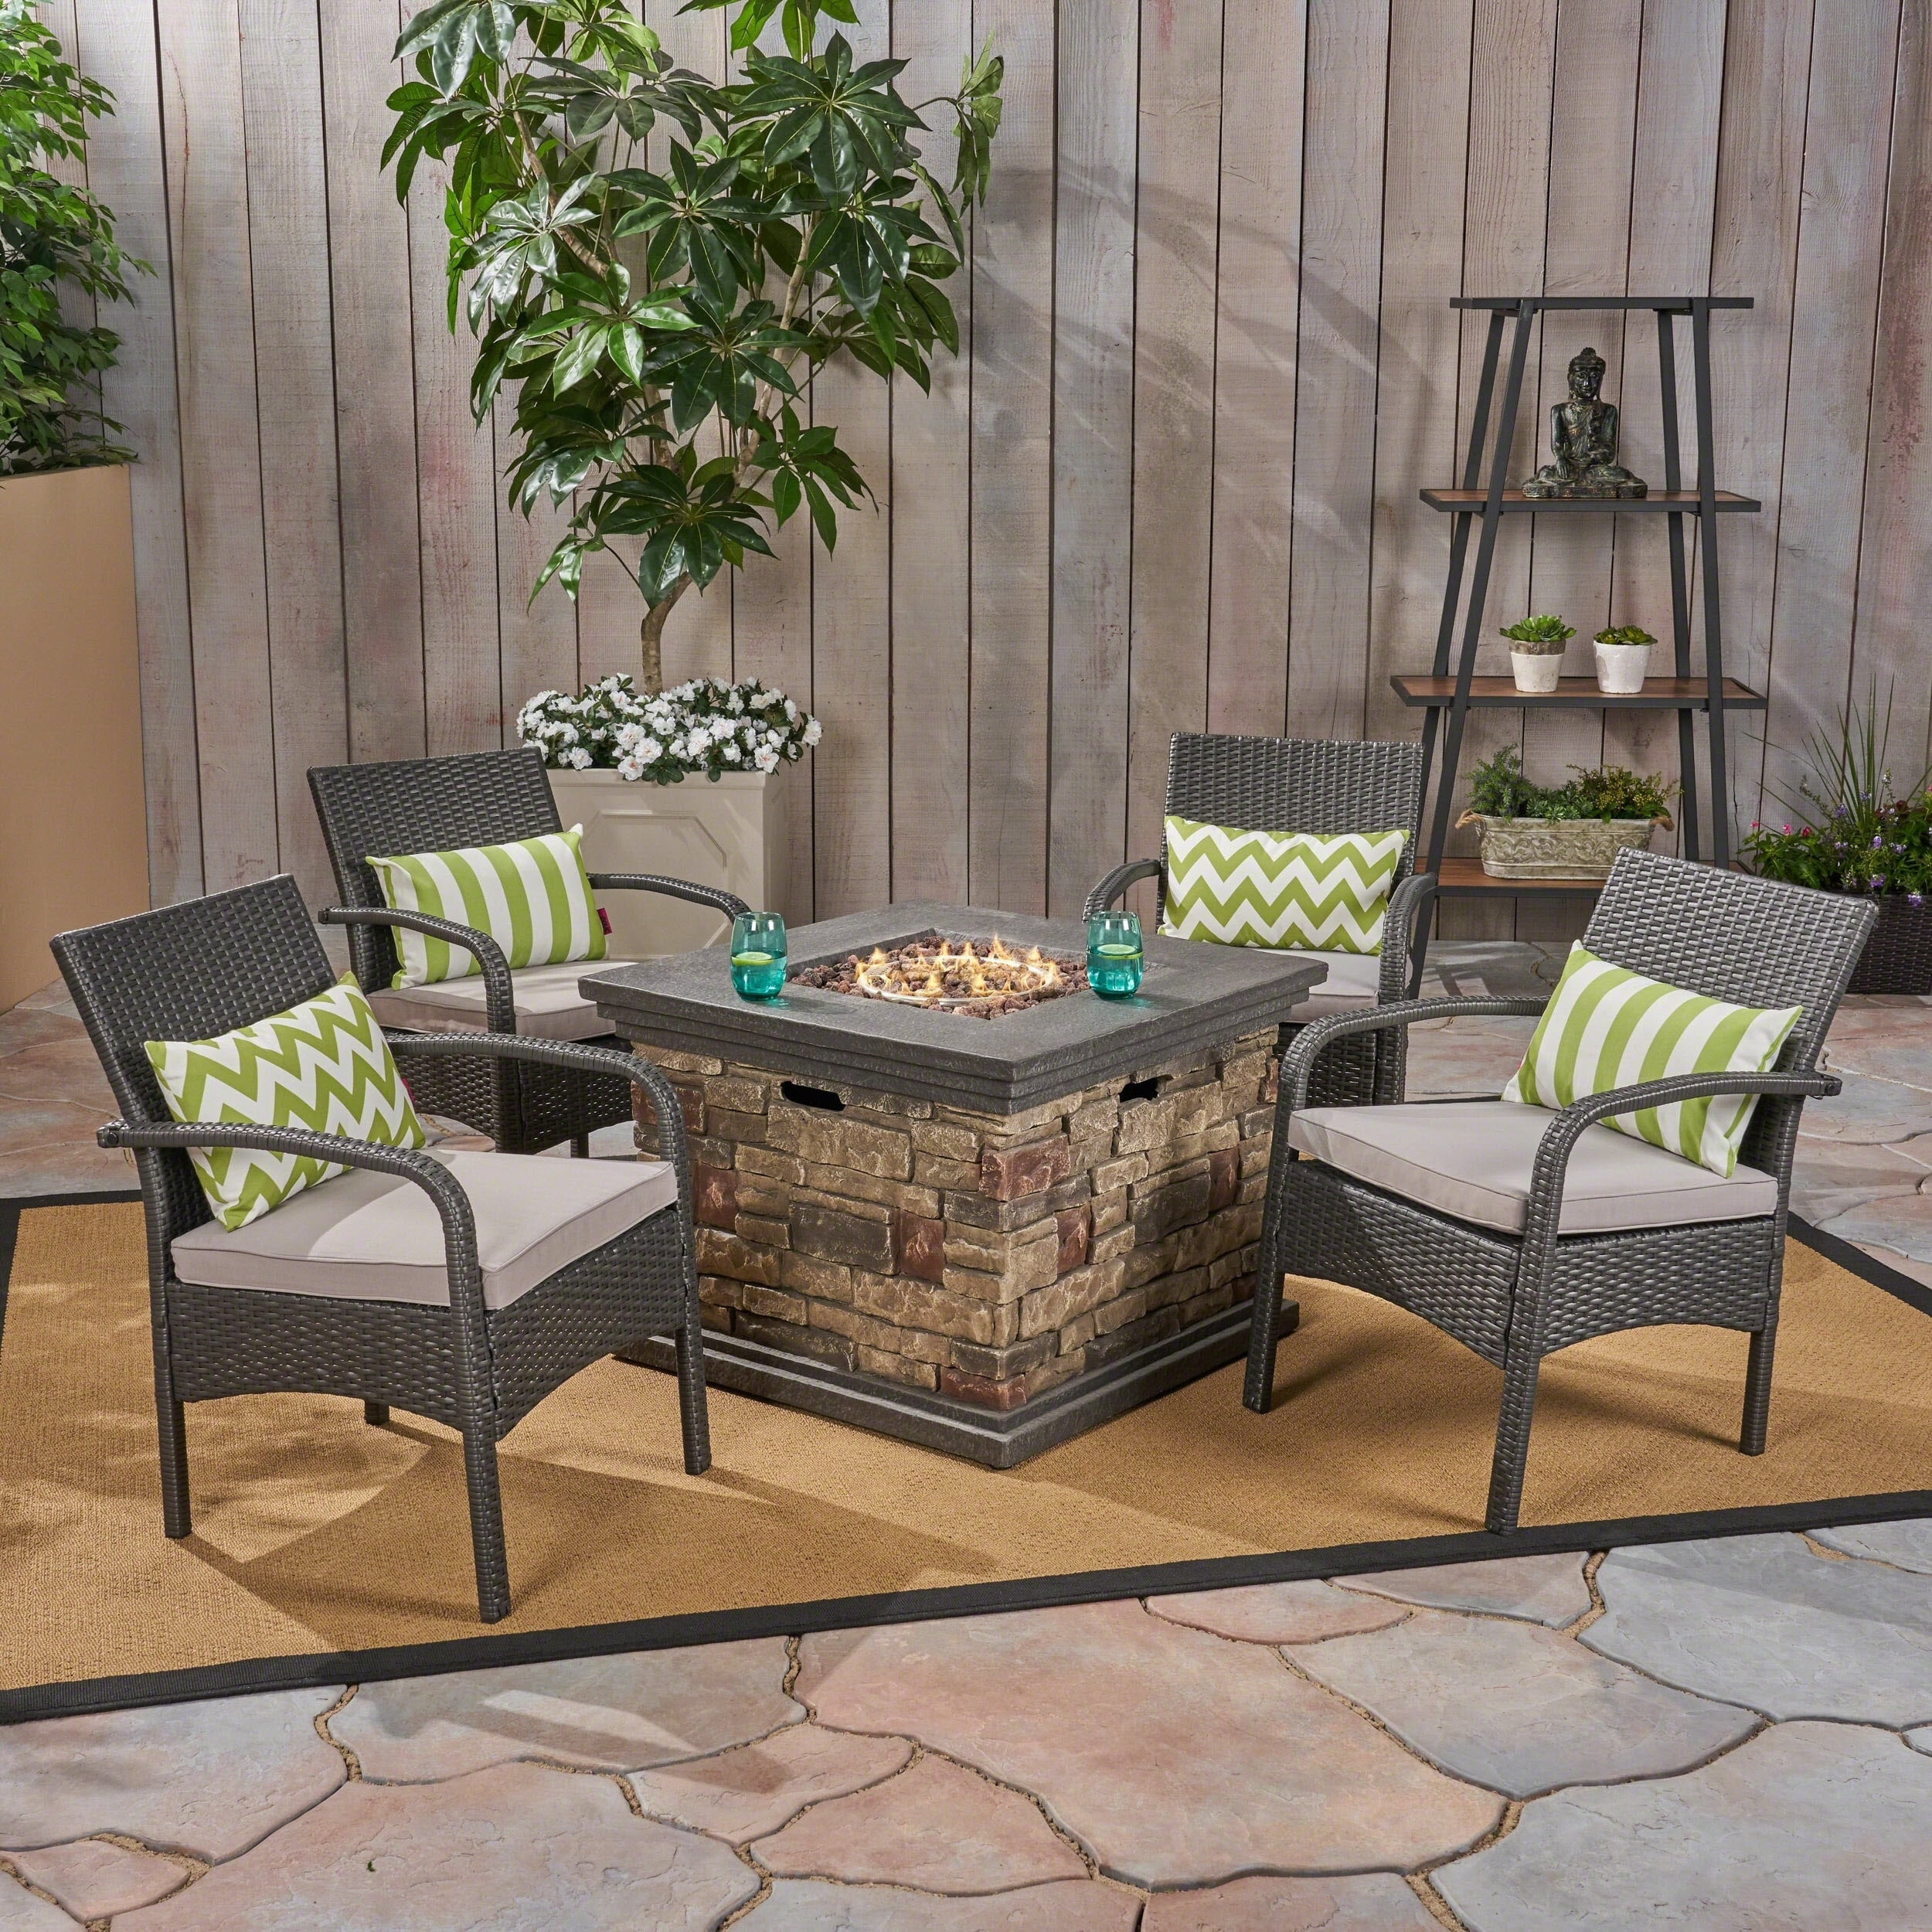 Christopher Knight Home Cordoba Outdoor, Outdoor Furniture Around Fire Pit